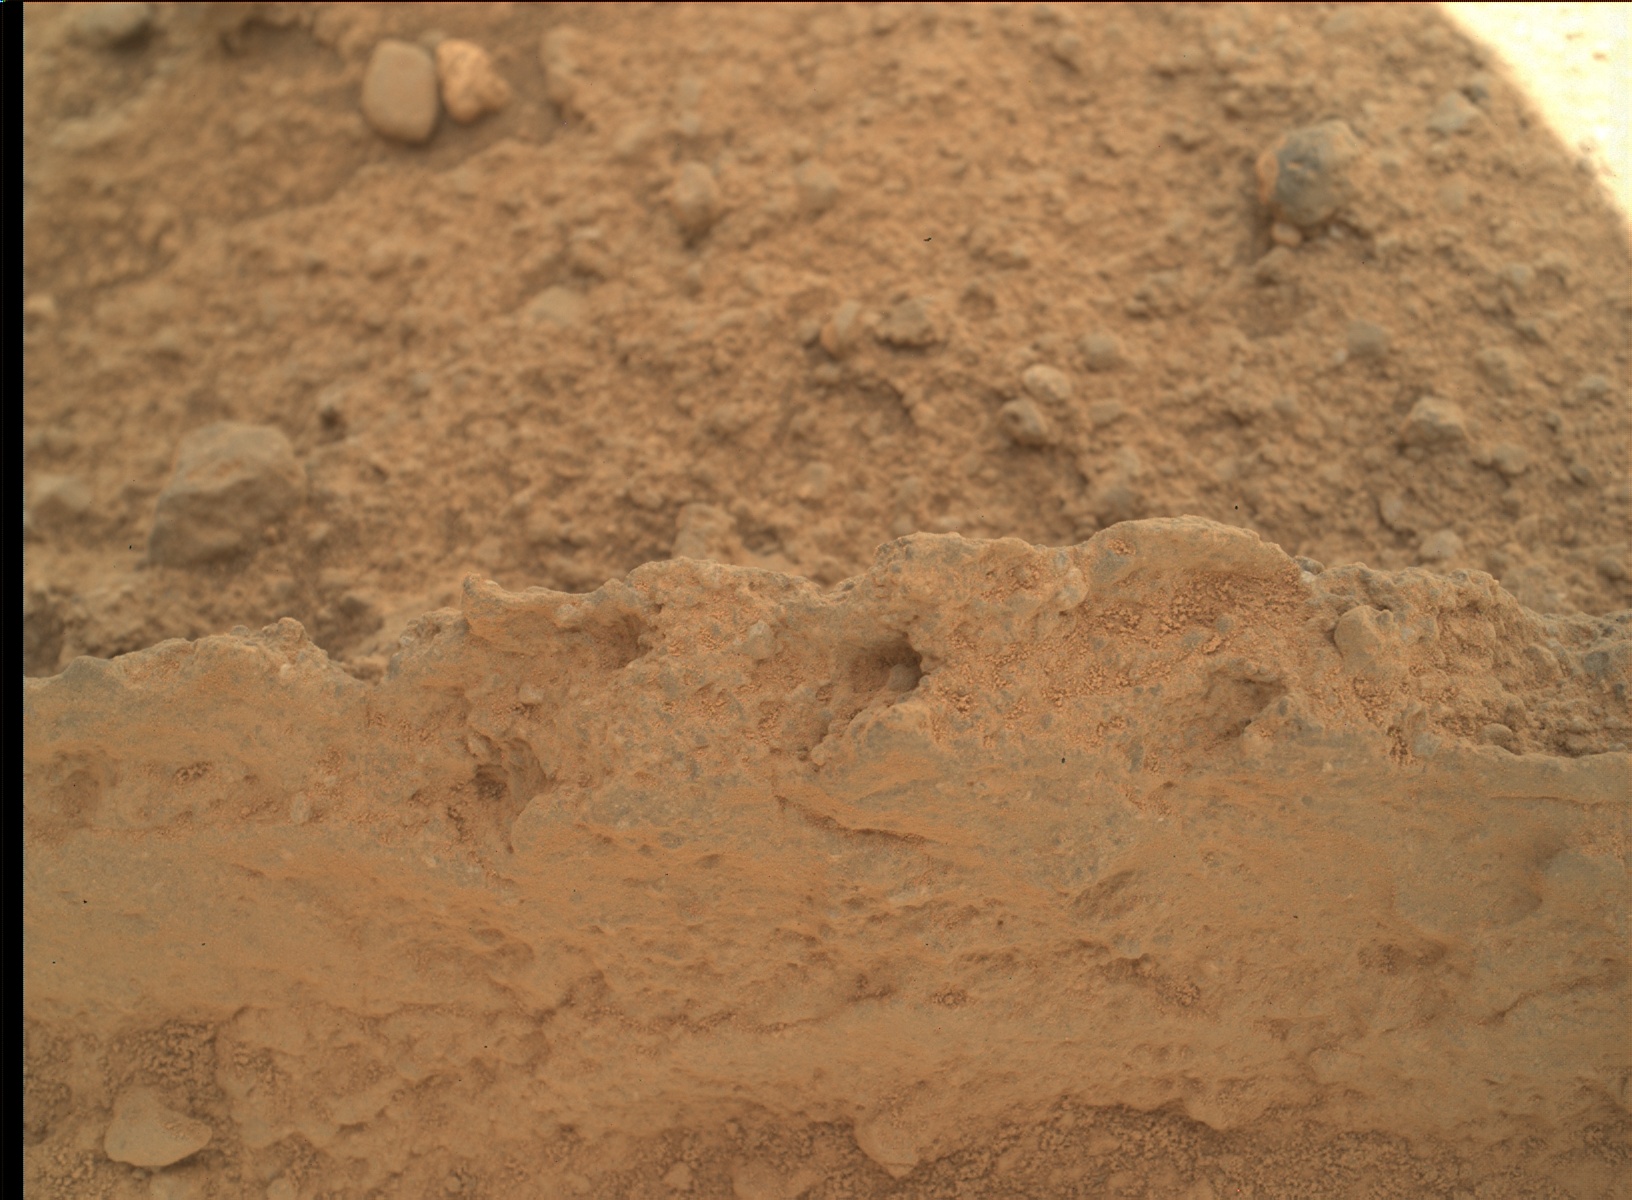 Nasa's Mars rover Curiosity acquired this image using its Mars Hand Lens Imager (MAHLI) on Sol 398